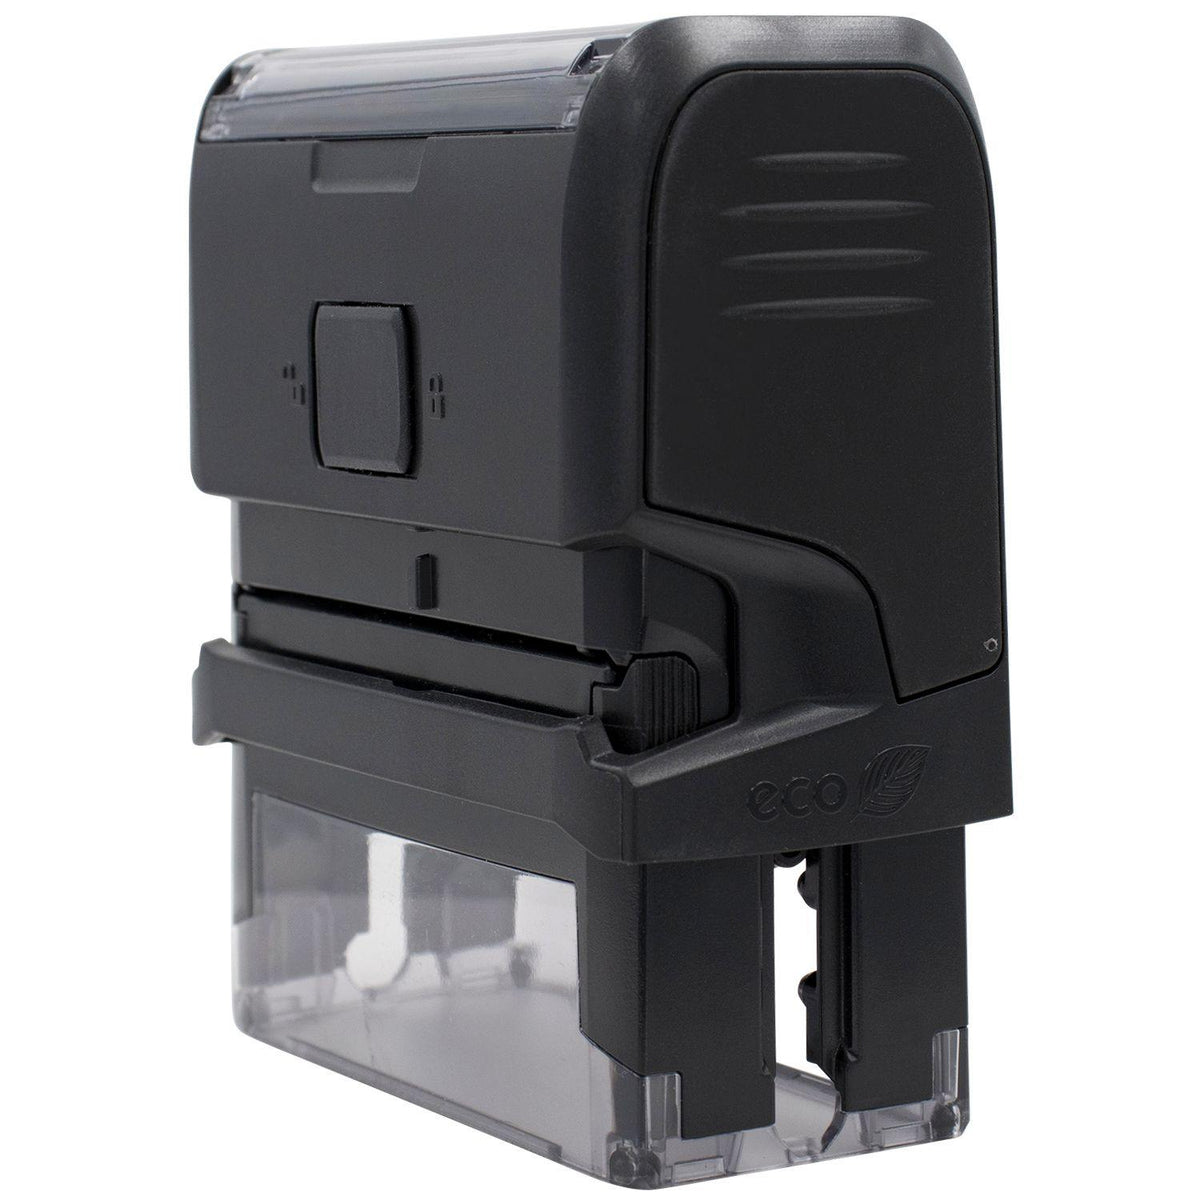 Self-Inking Standard Mail B Stamp - Engineer Seal Stamps - Brand_Trodat, Impression Size_Small, Stamp Type_Self-Inking Stamp, Type of Use_Postal &amp; Mailing